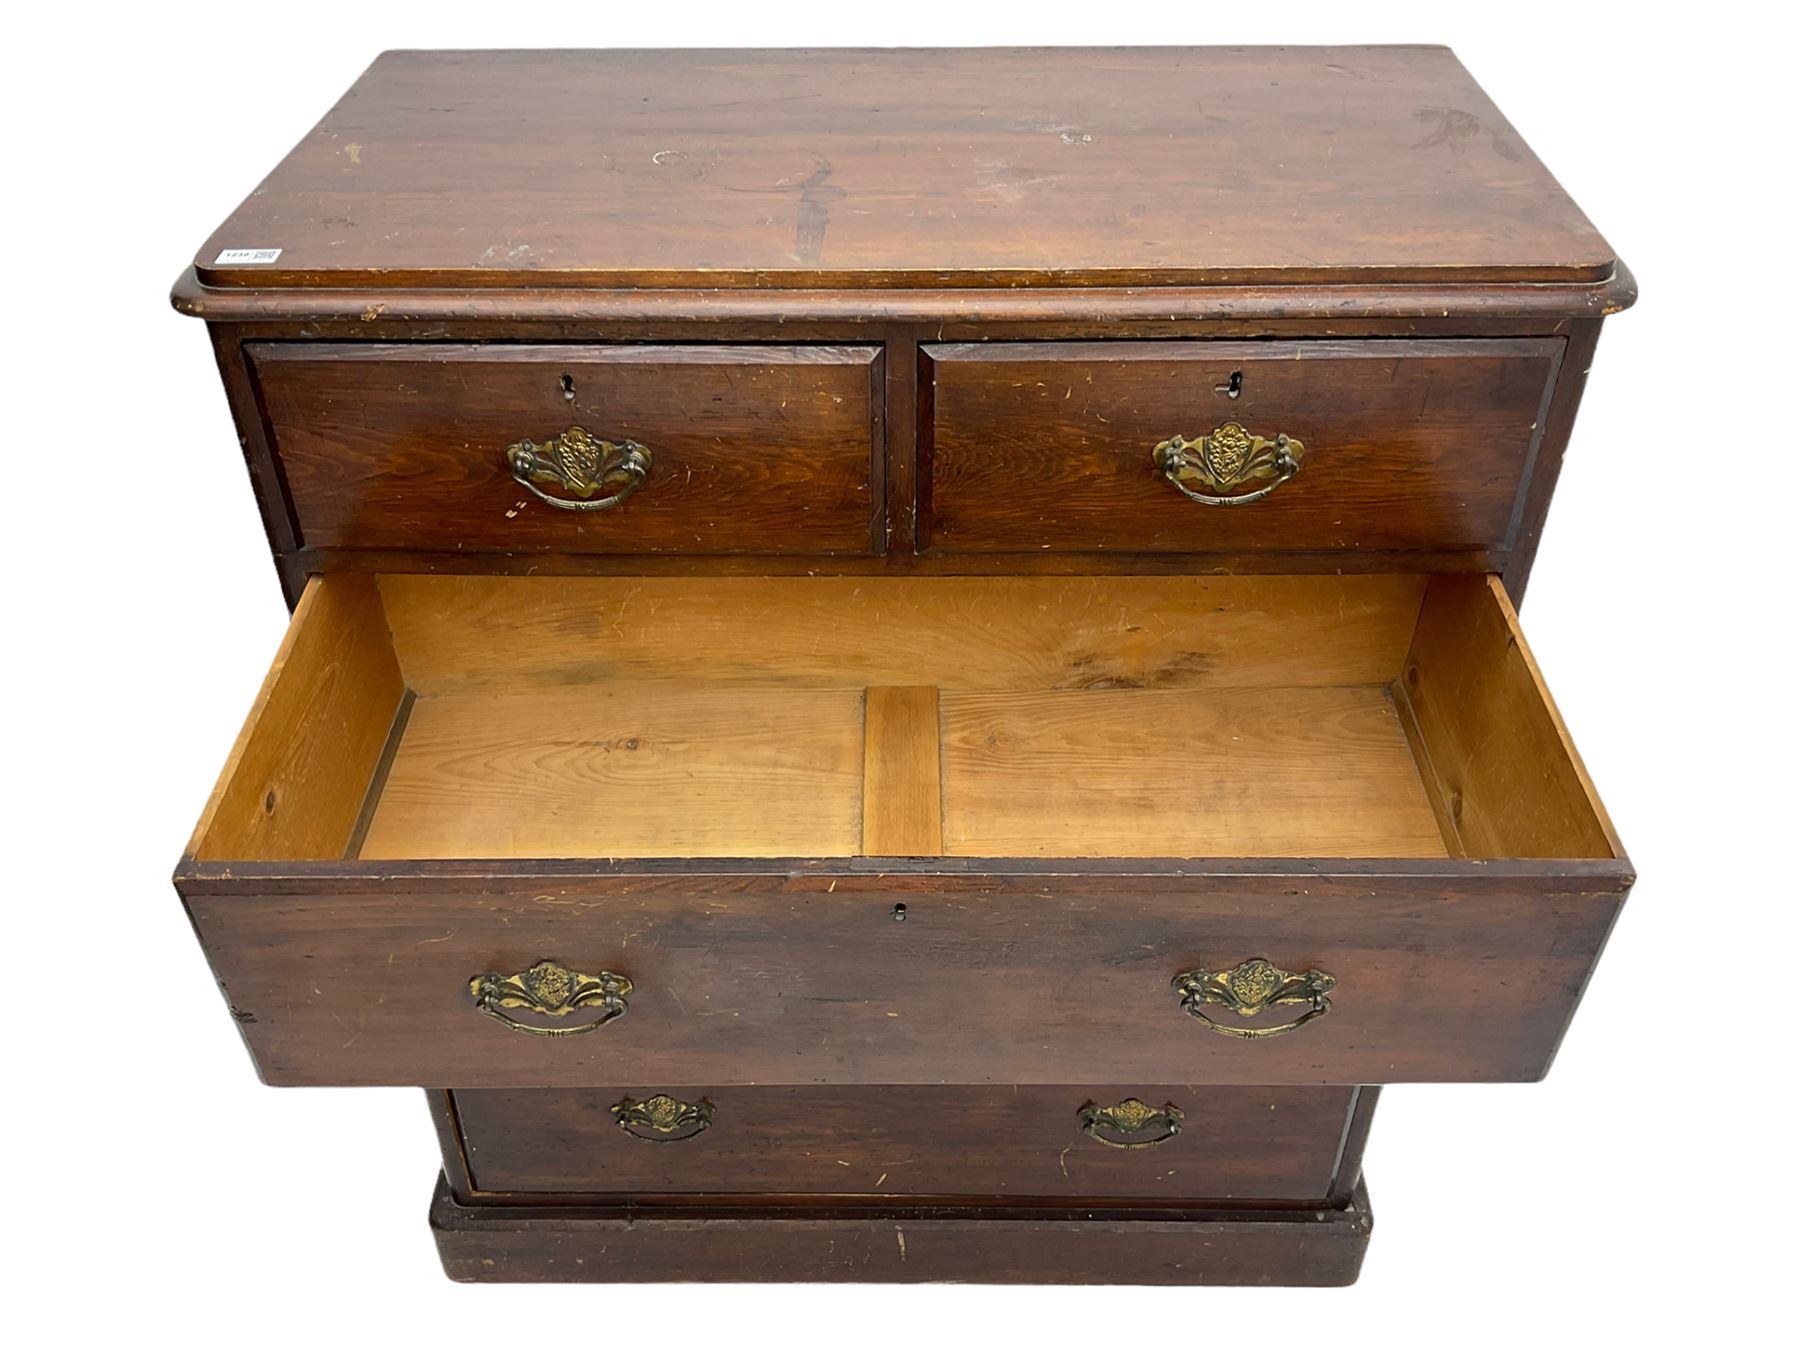 19th century stained pine chest - Image 4 of 5